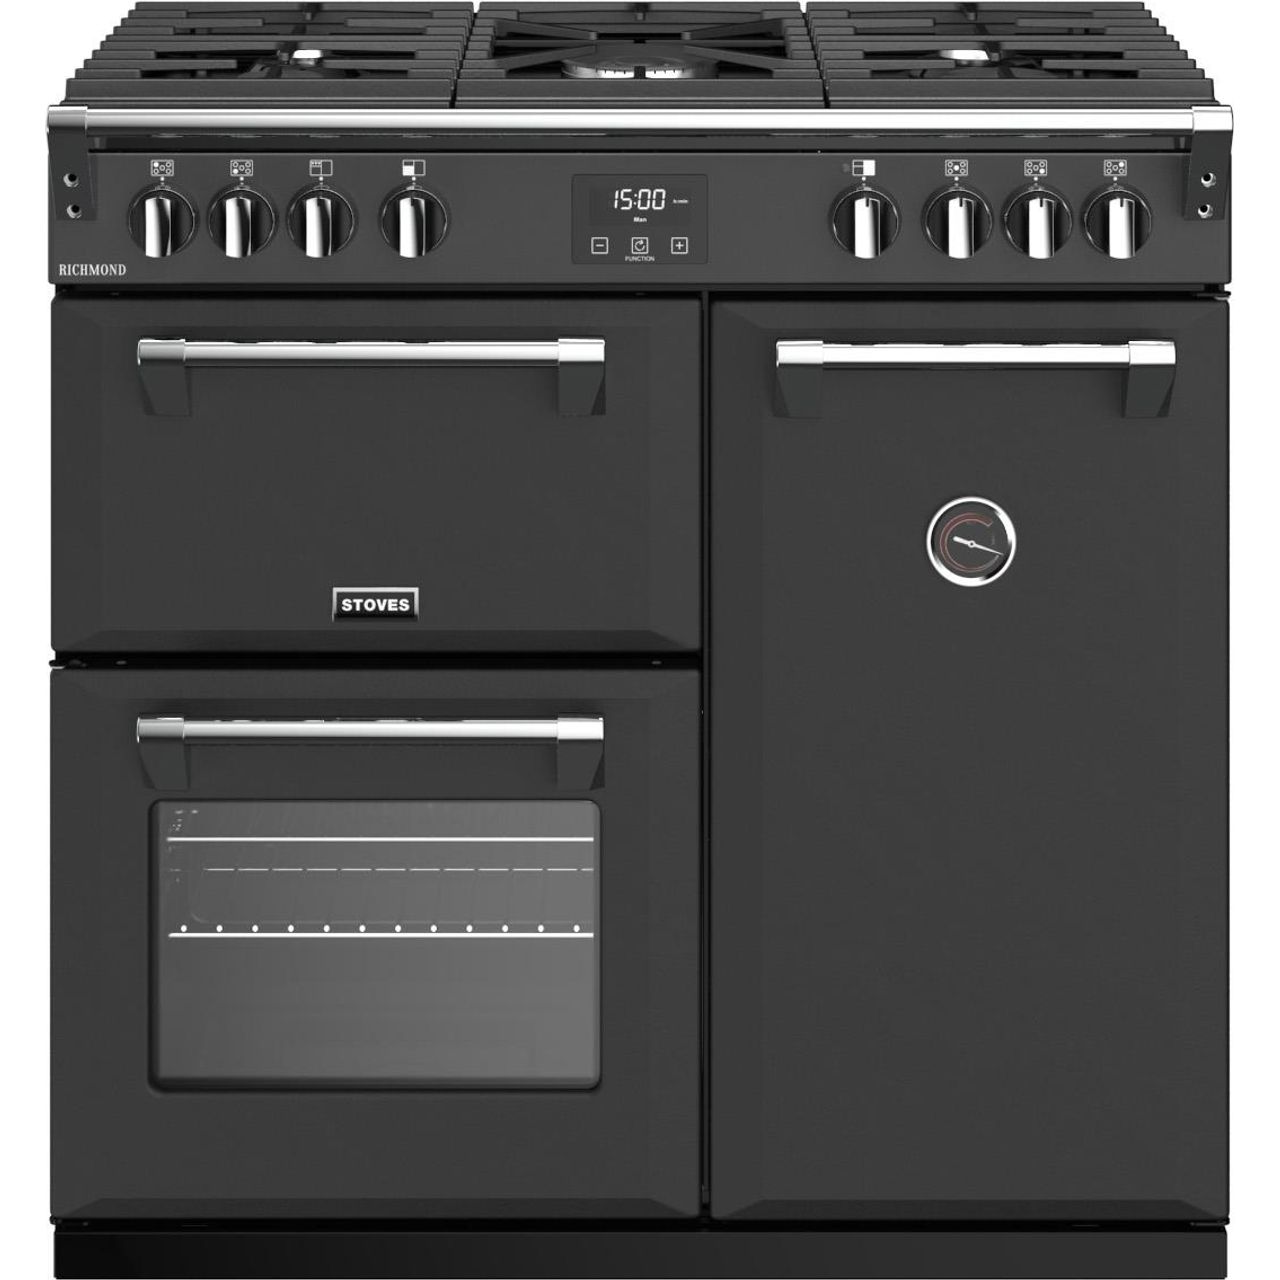 Stoves Richmond S900G 90cm Gas Range Cooker with Electric Fan Oven Review